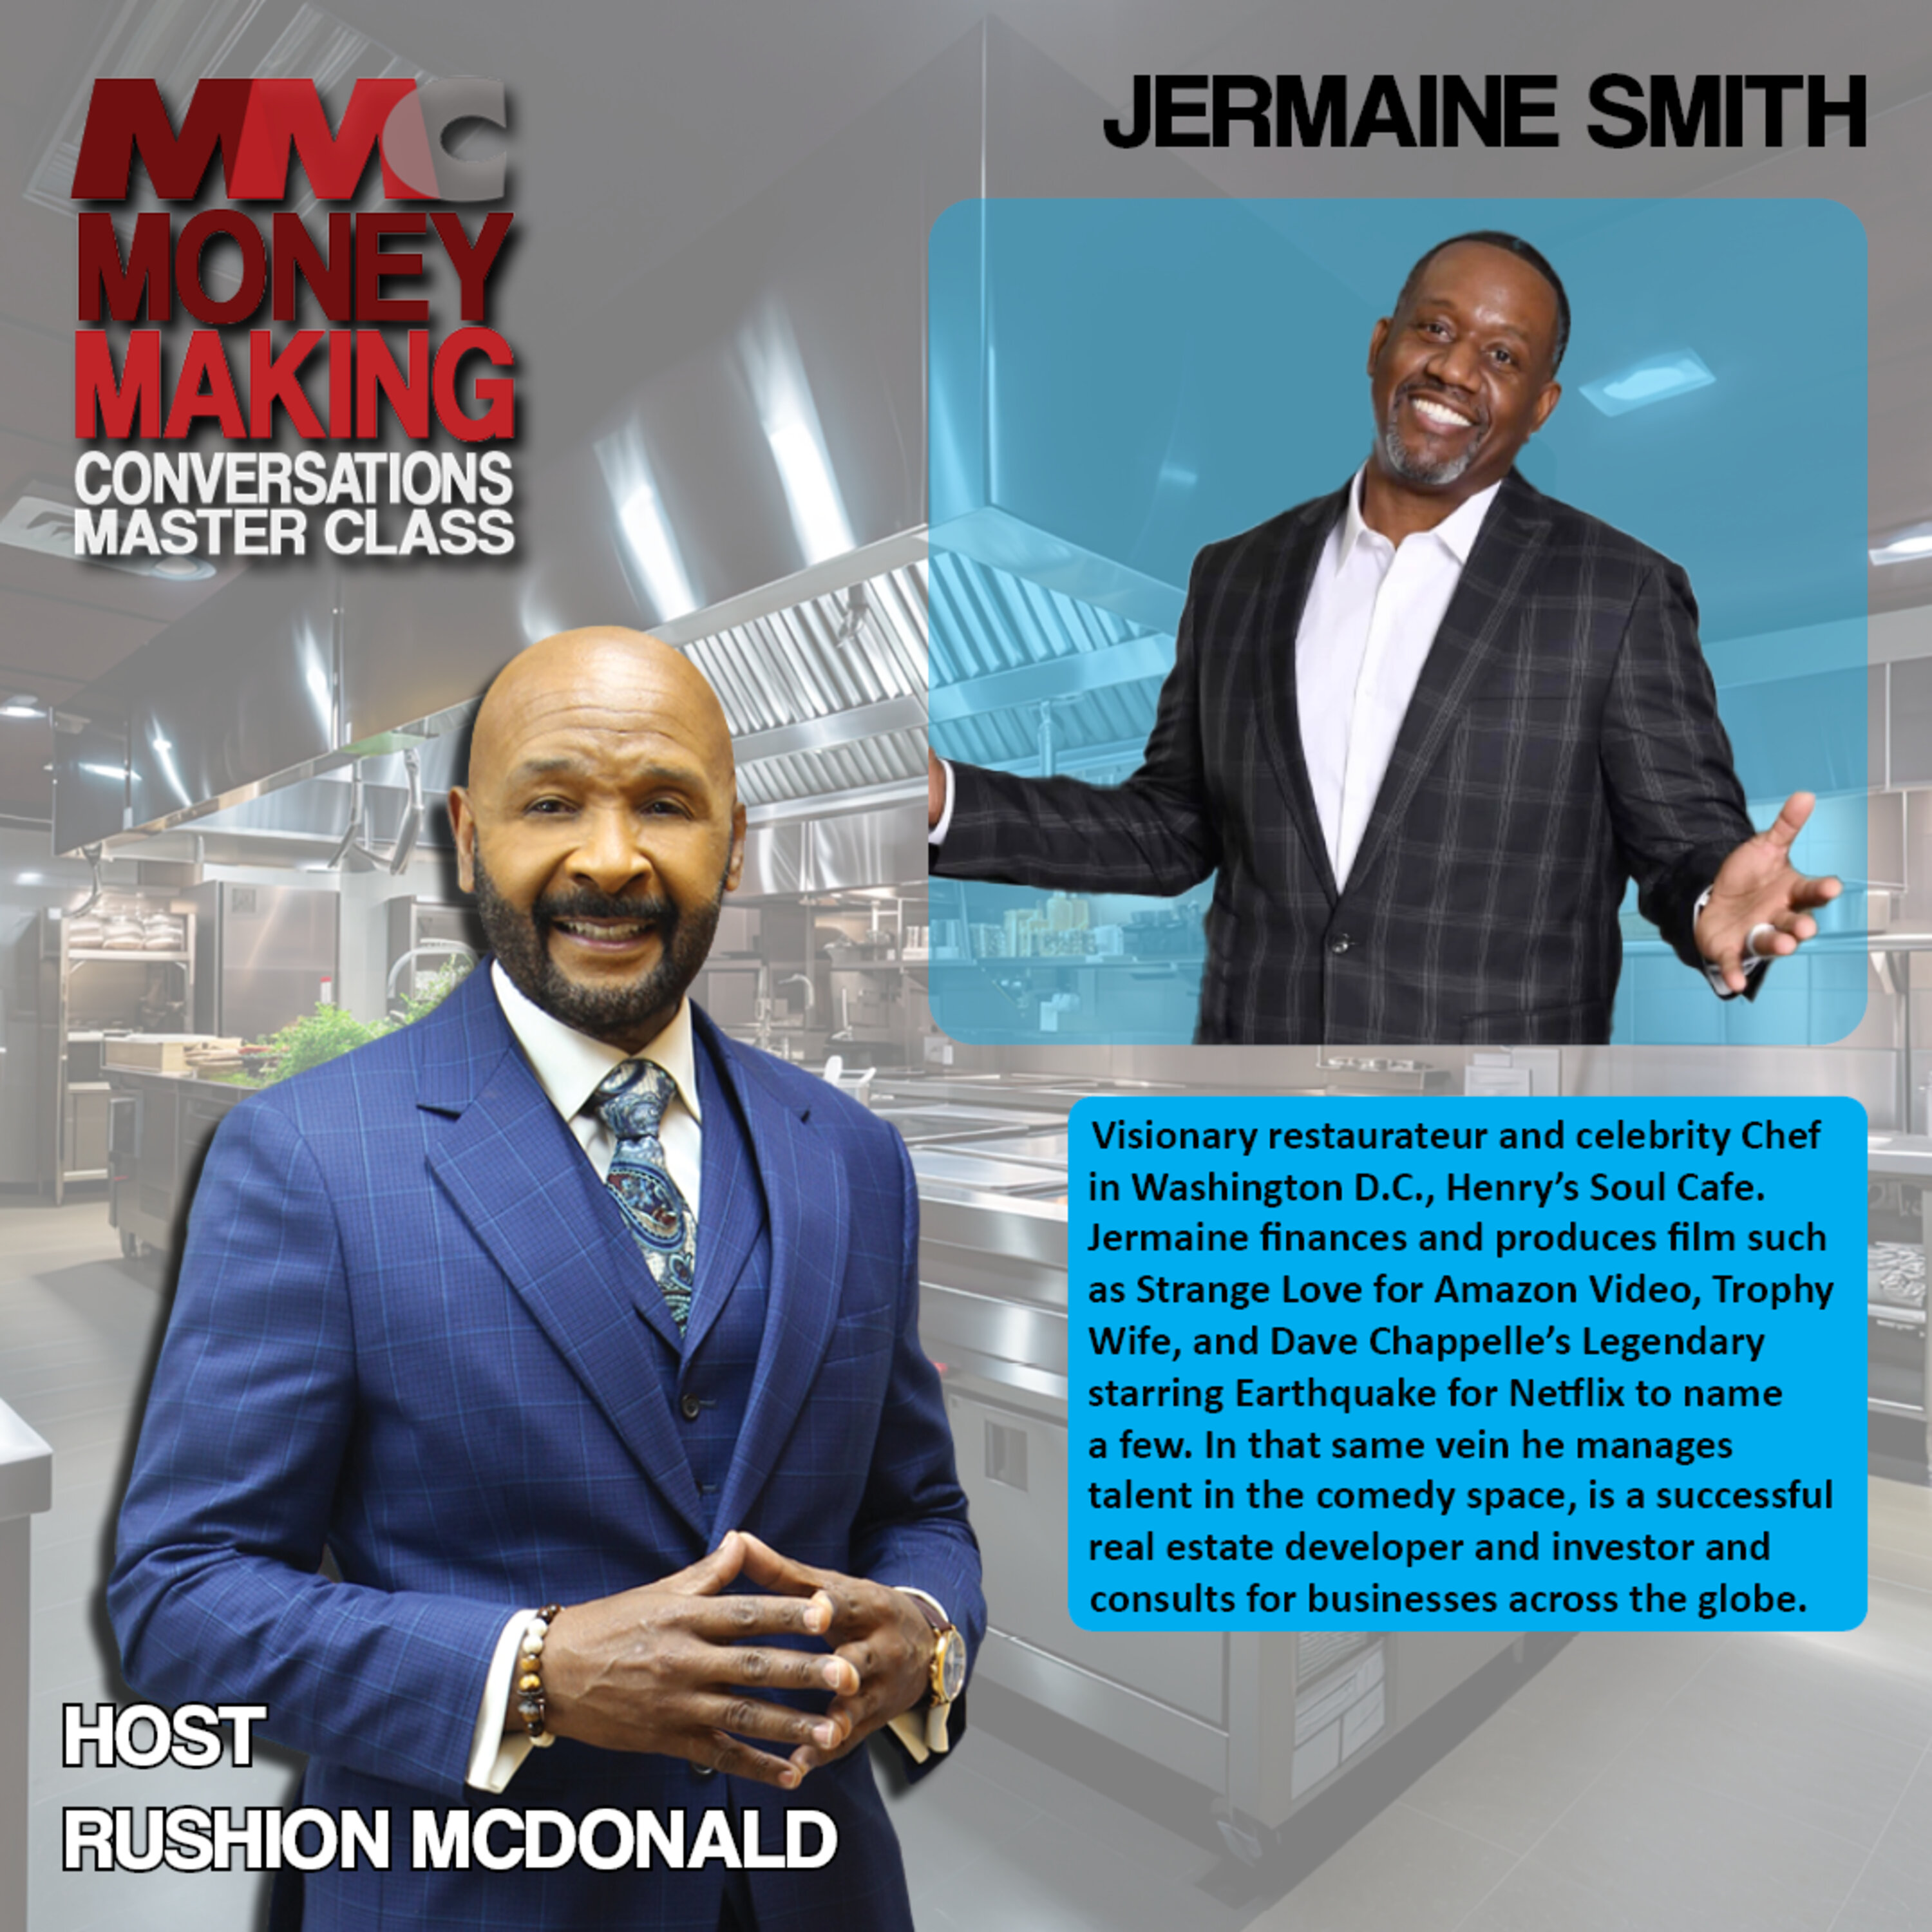 Celebrity Soul Food Chef Jermaine Smith reveals the Mumbo Sauce history and his popular Washington D.C. based restaurant Henry's Soul Cafe in the DMV.